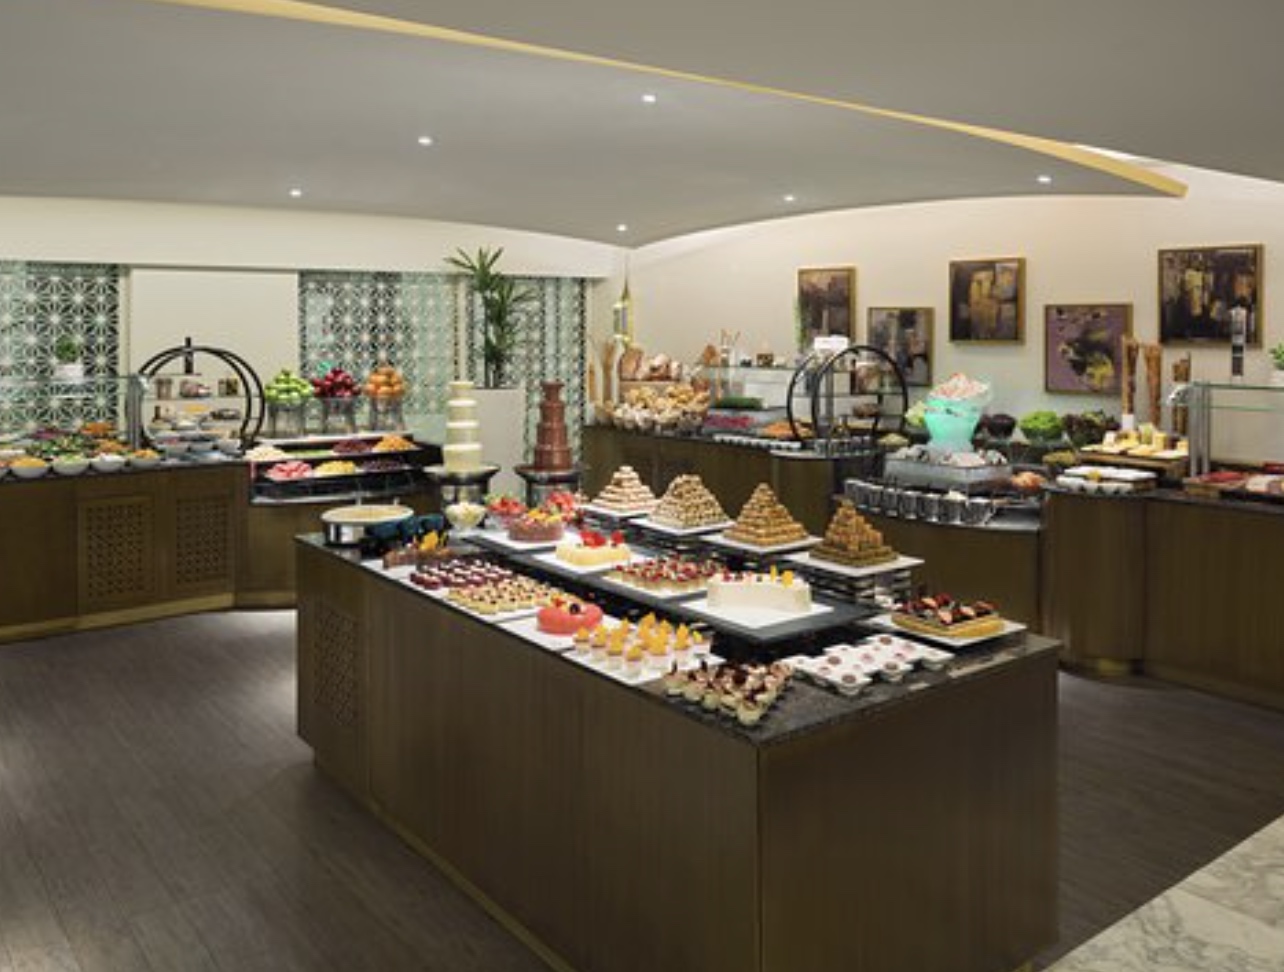 
The Kitchens The Hotel Galleria, Curio Collection by Hilton